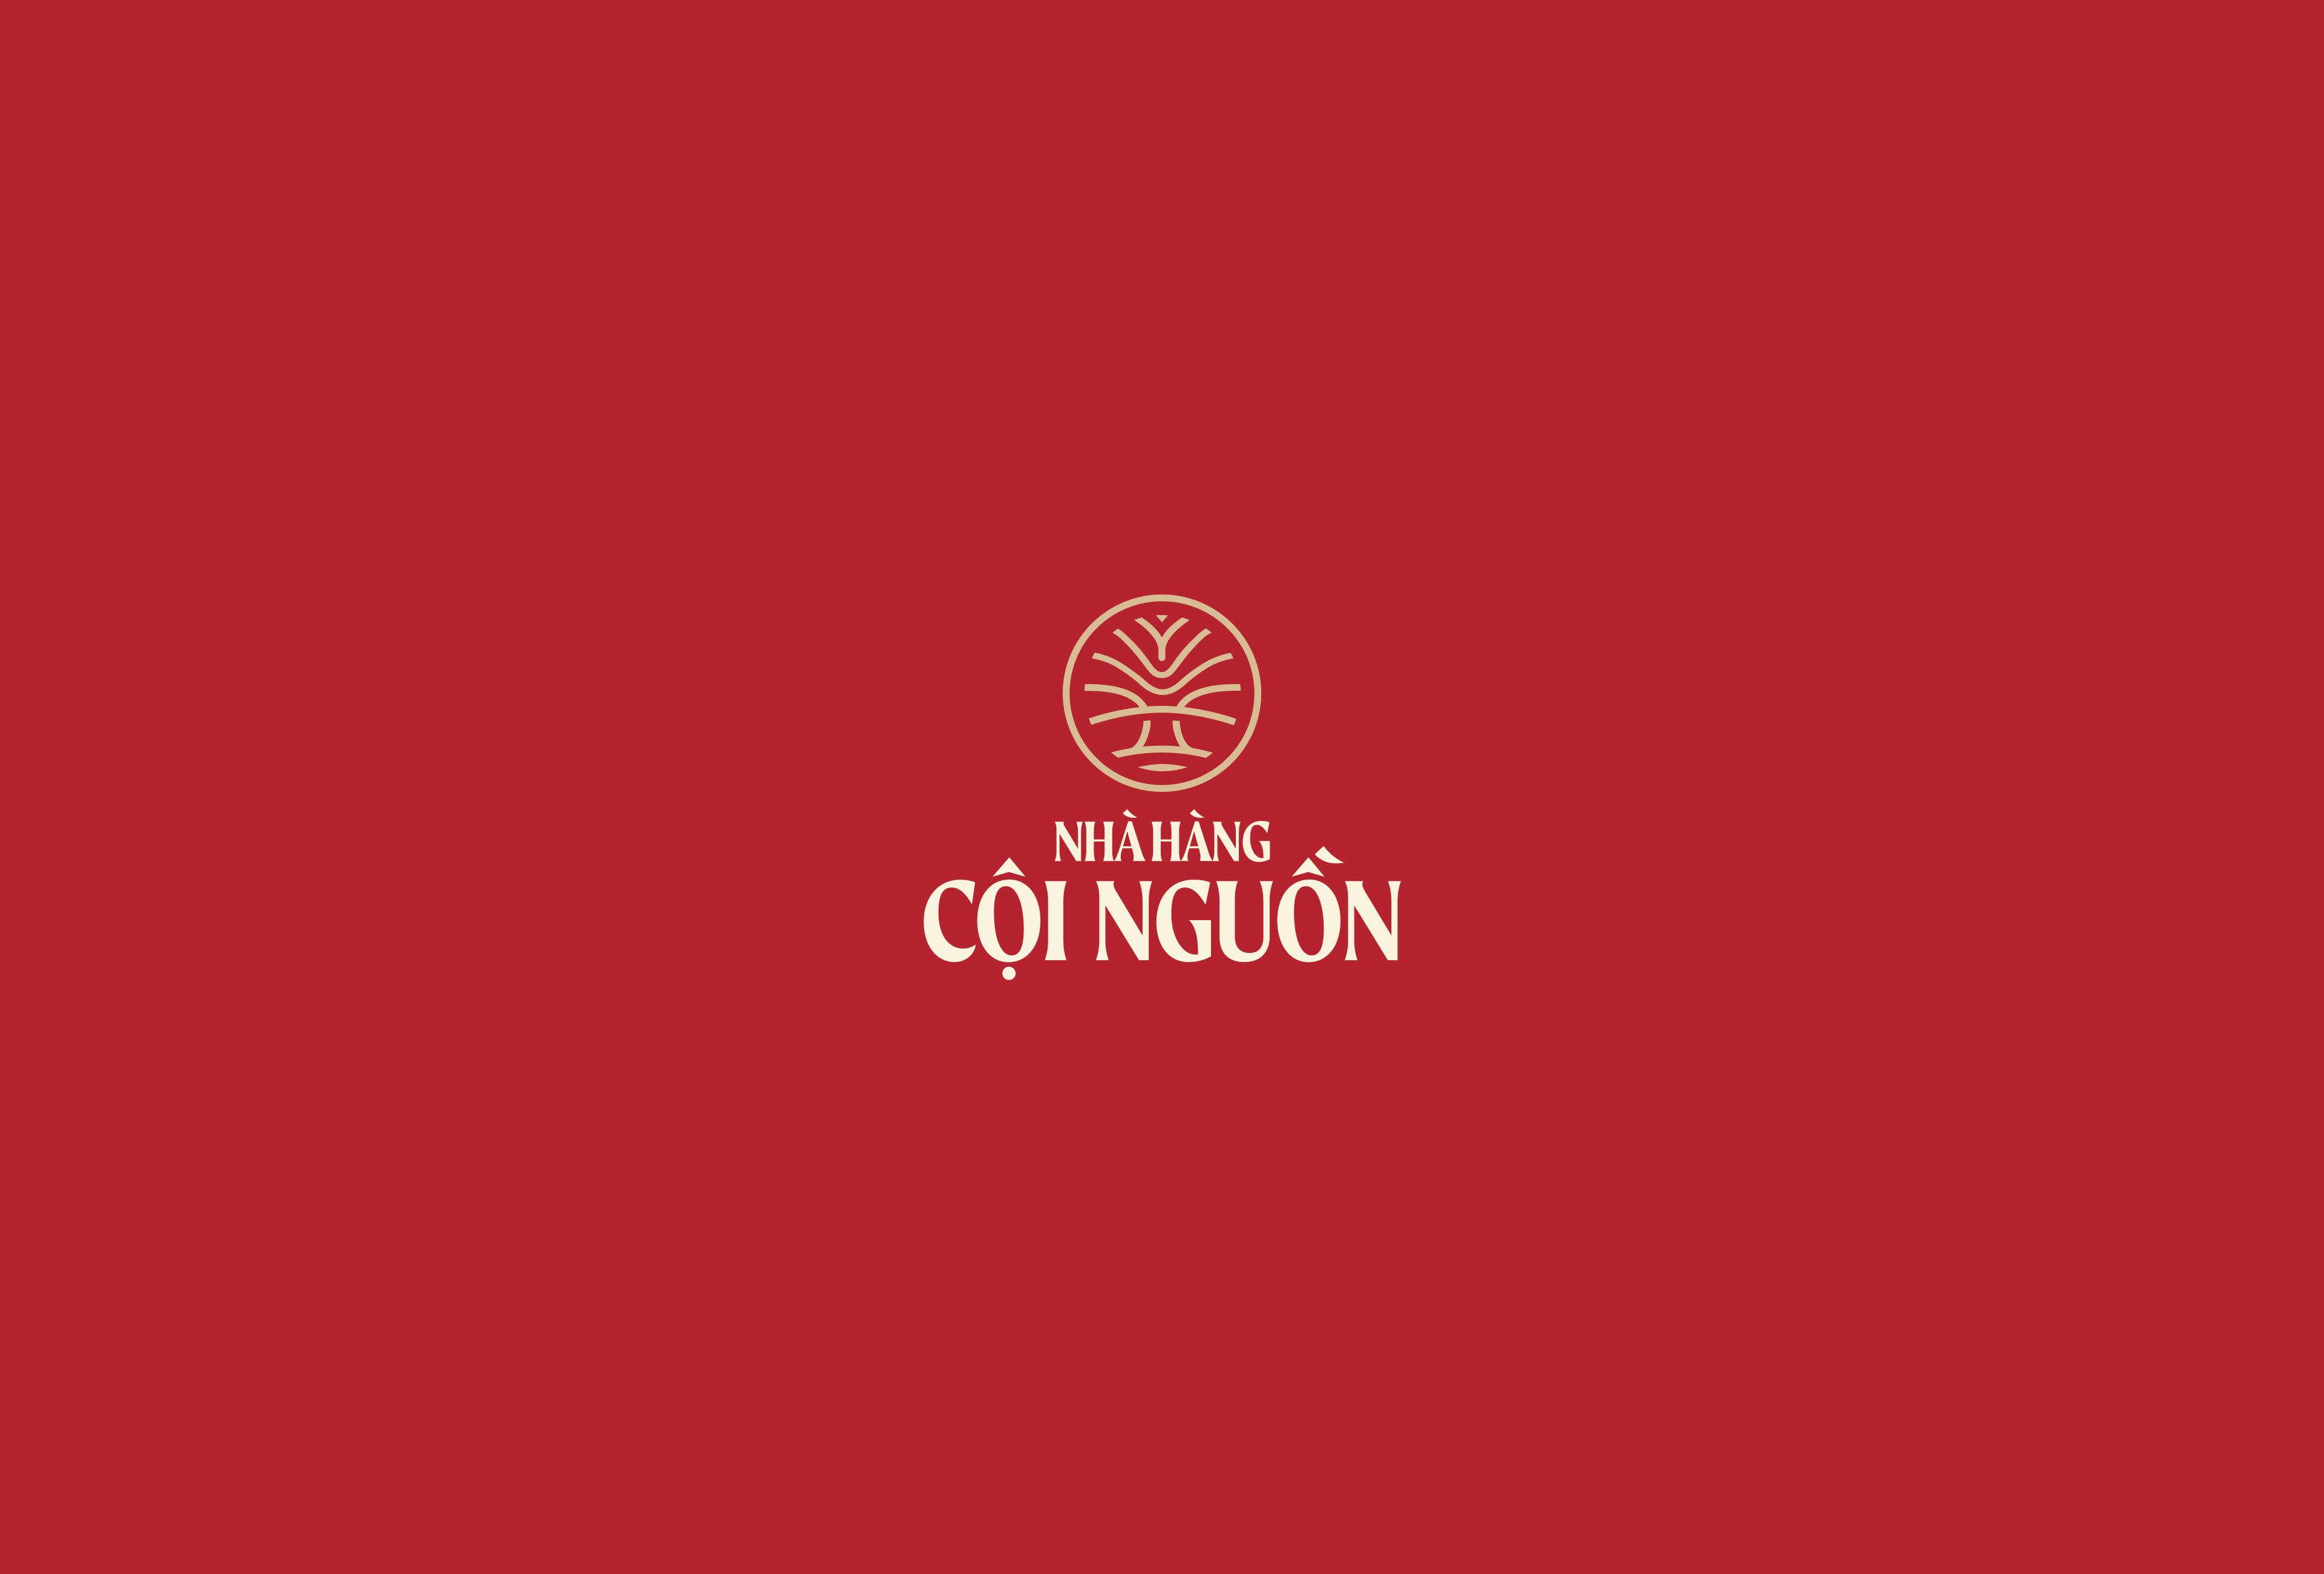 Coi Nguon Restaurant Branding and Packaging Design